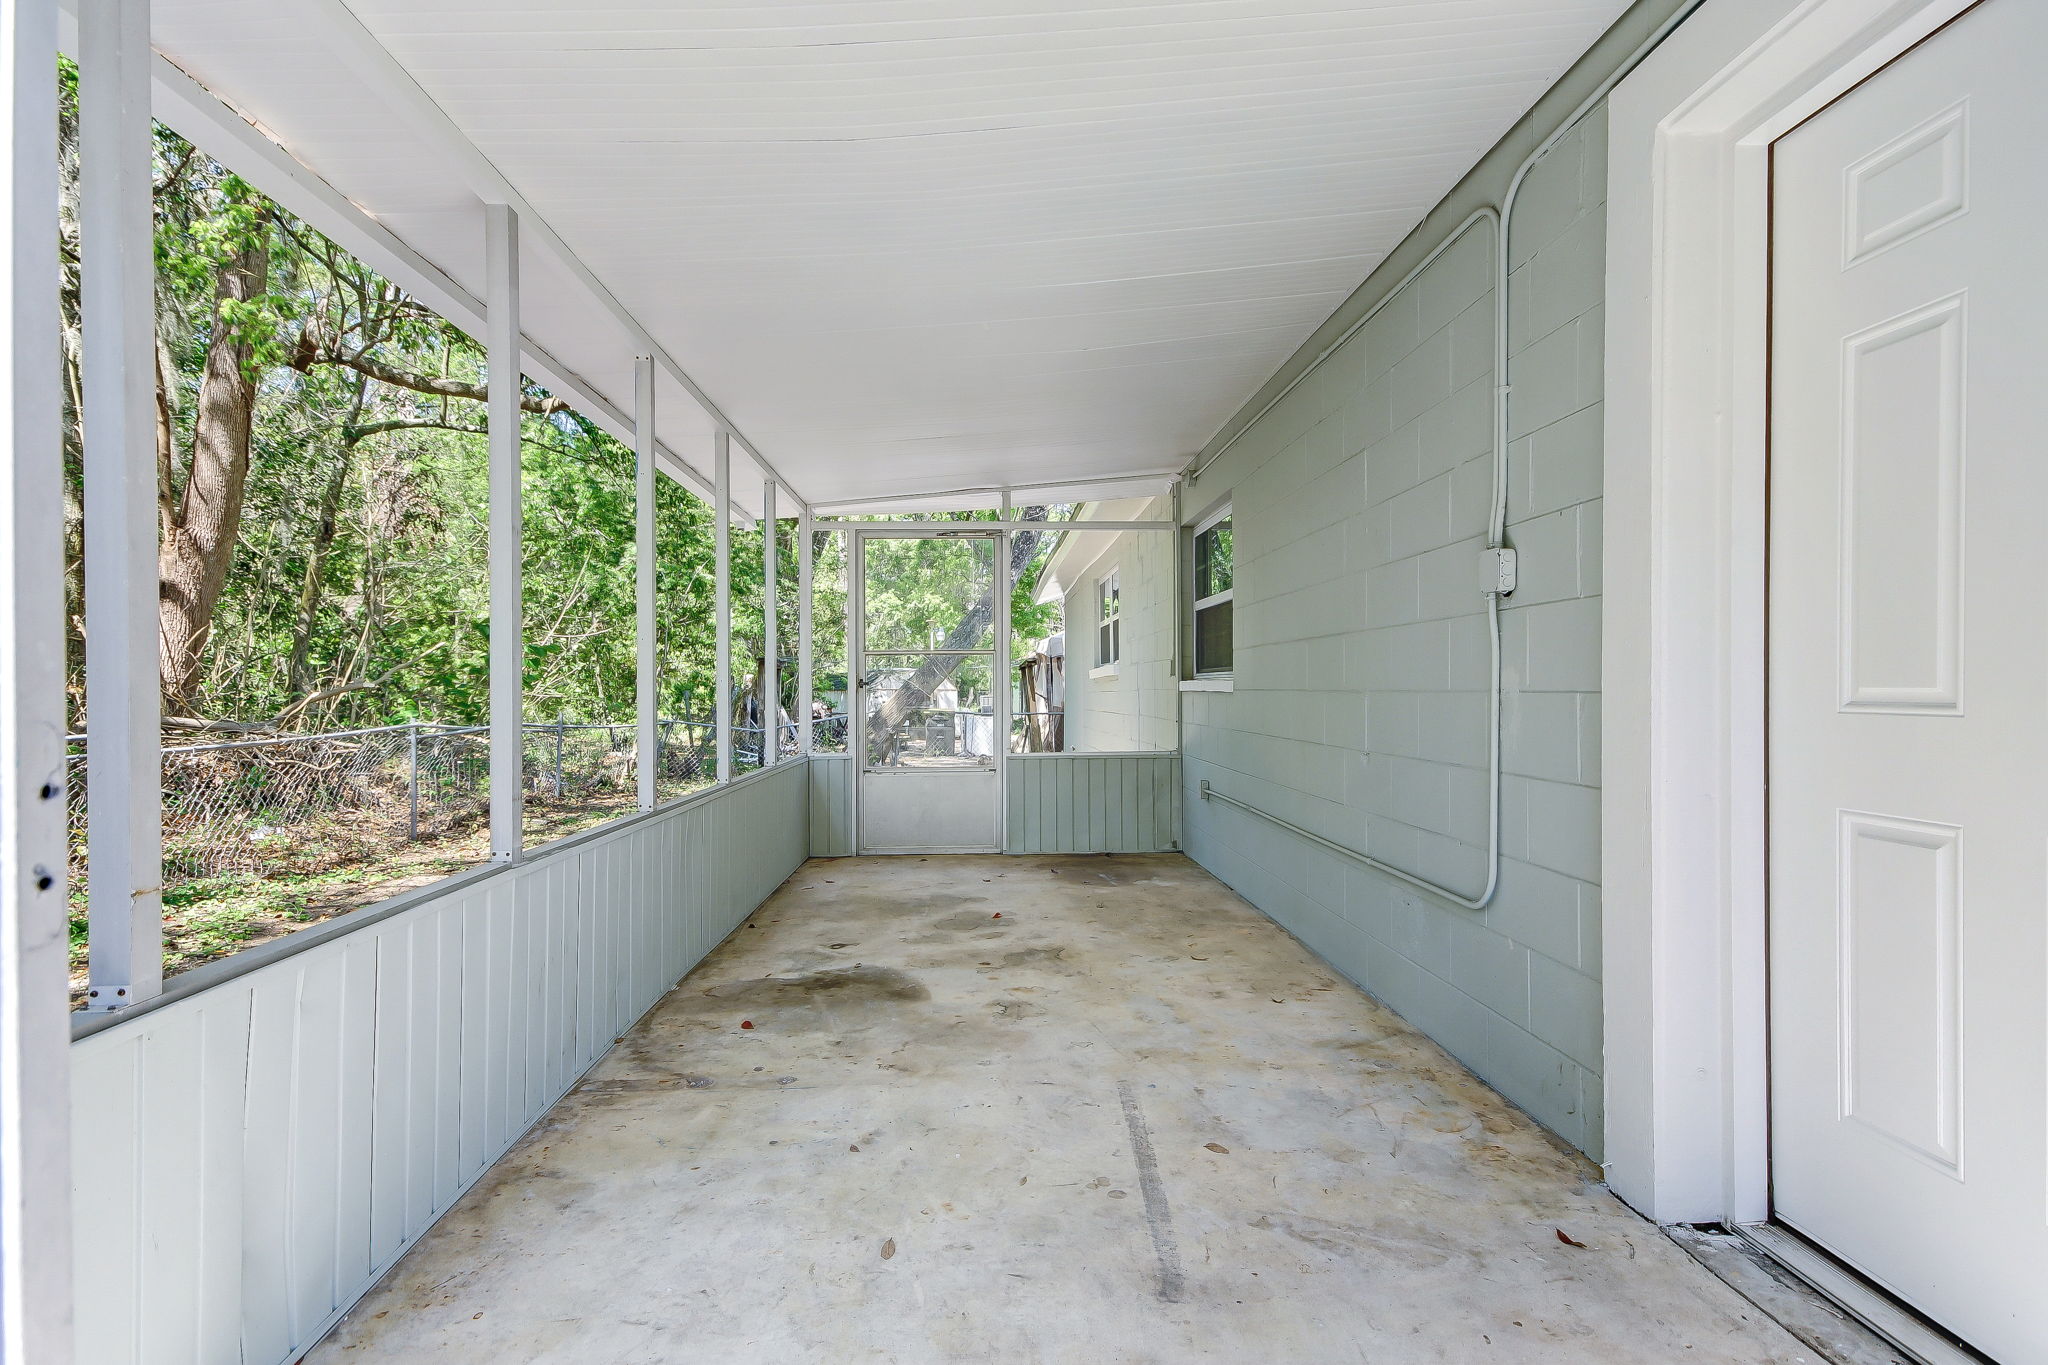 Covered Porch